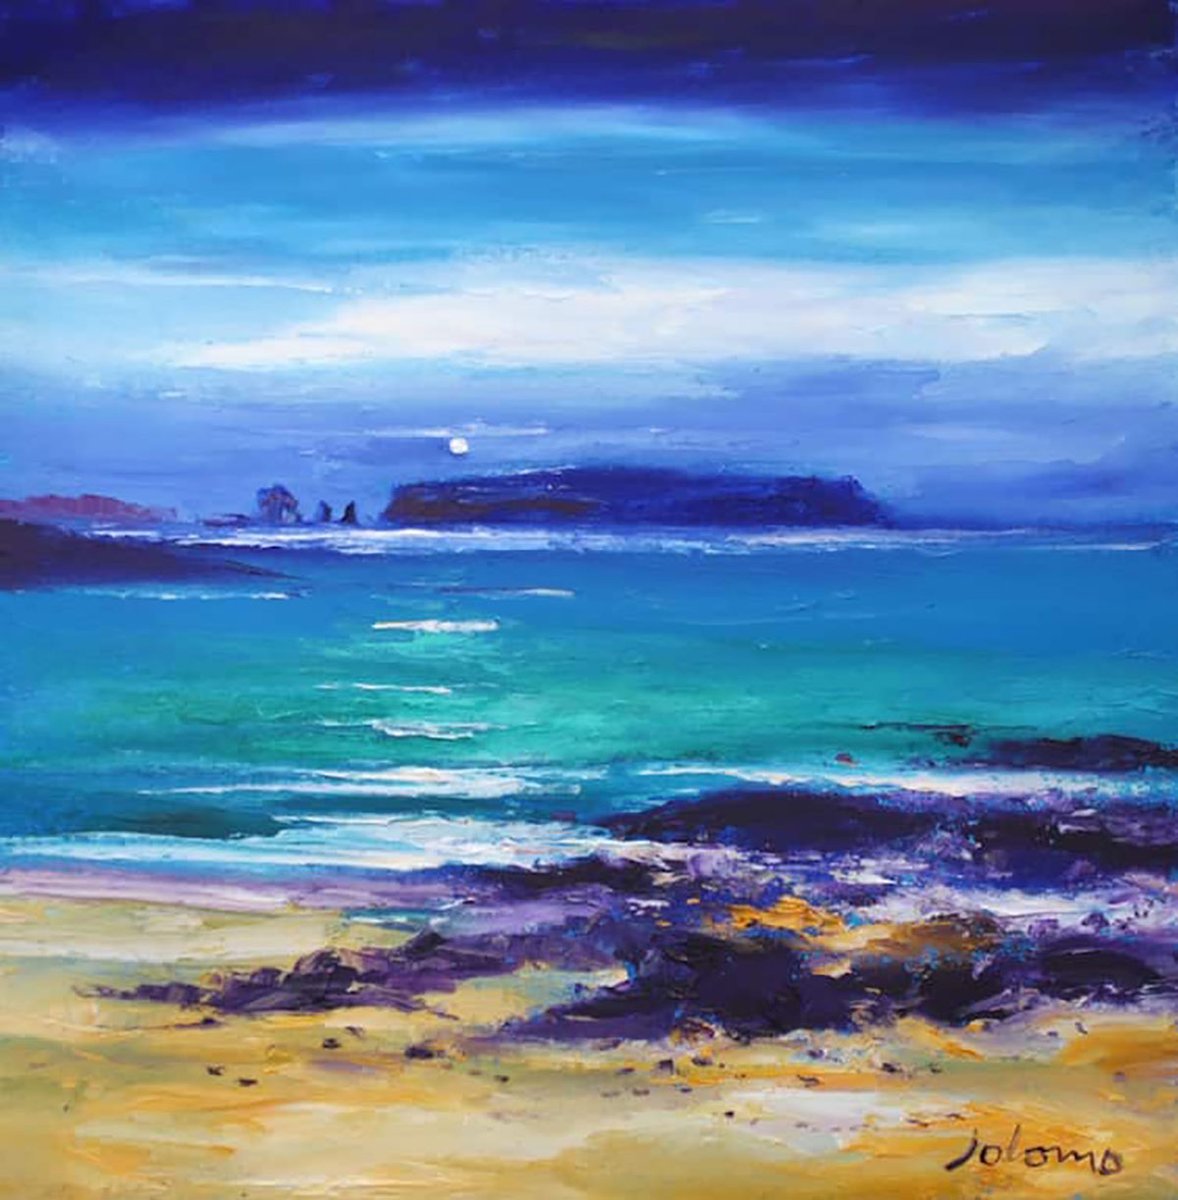 Final day tomorrow: @galleryqdundee’s exhibition is an opportunity to view John Lowrie Morrison's aka Jolomo's latest works, revisiting favourite sites on the Isle of Harris.
artmag.co.uk/john-lowrie-mo…
#artmag #scottishart #scottishgalleries #scottishartonline #scottishpainting